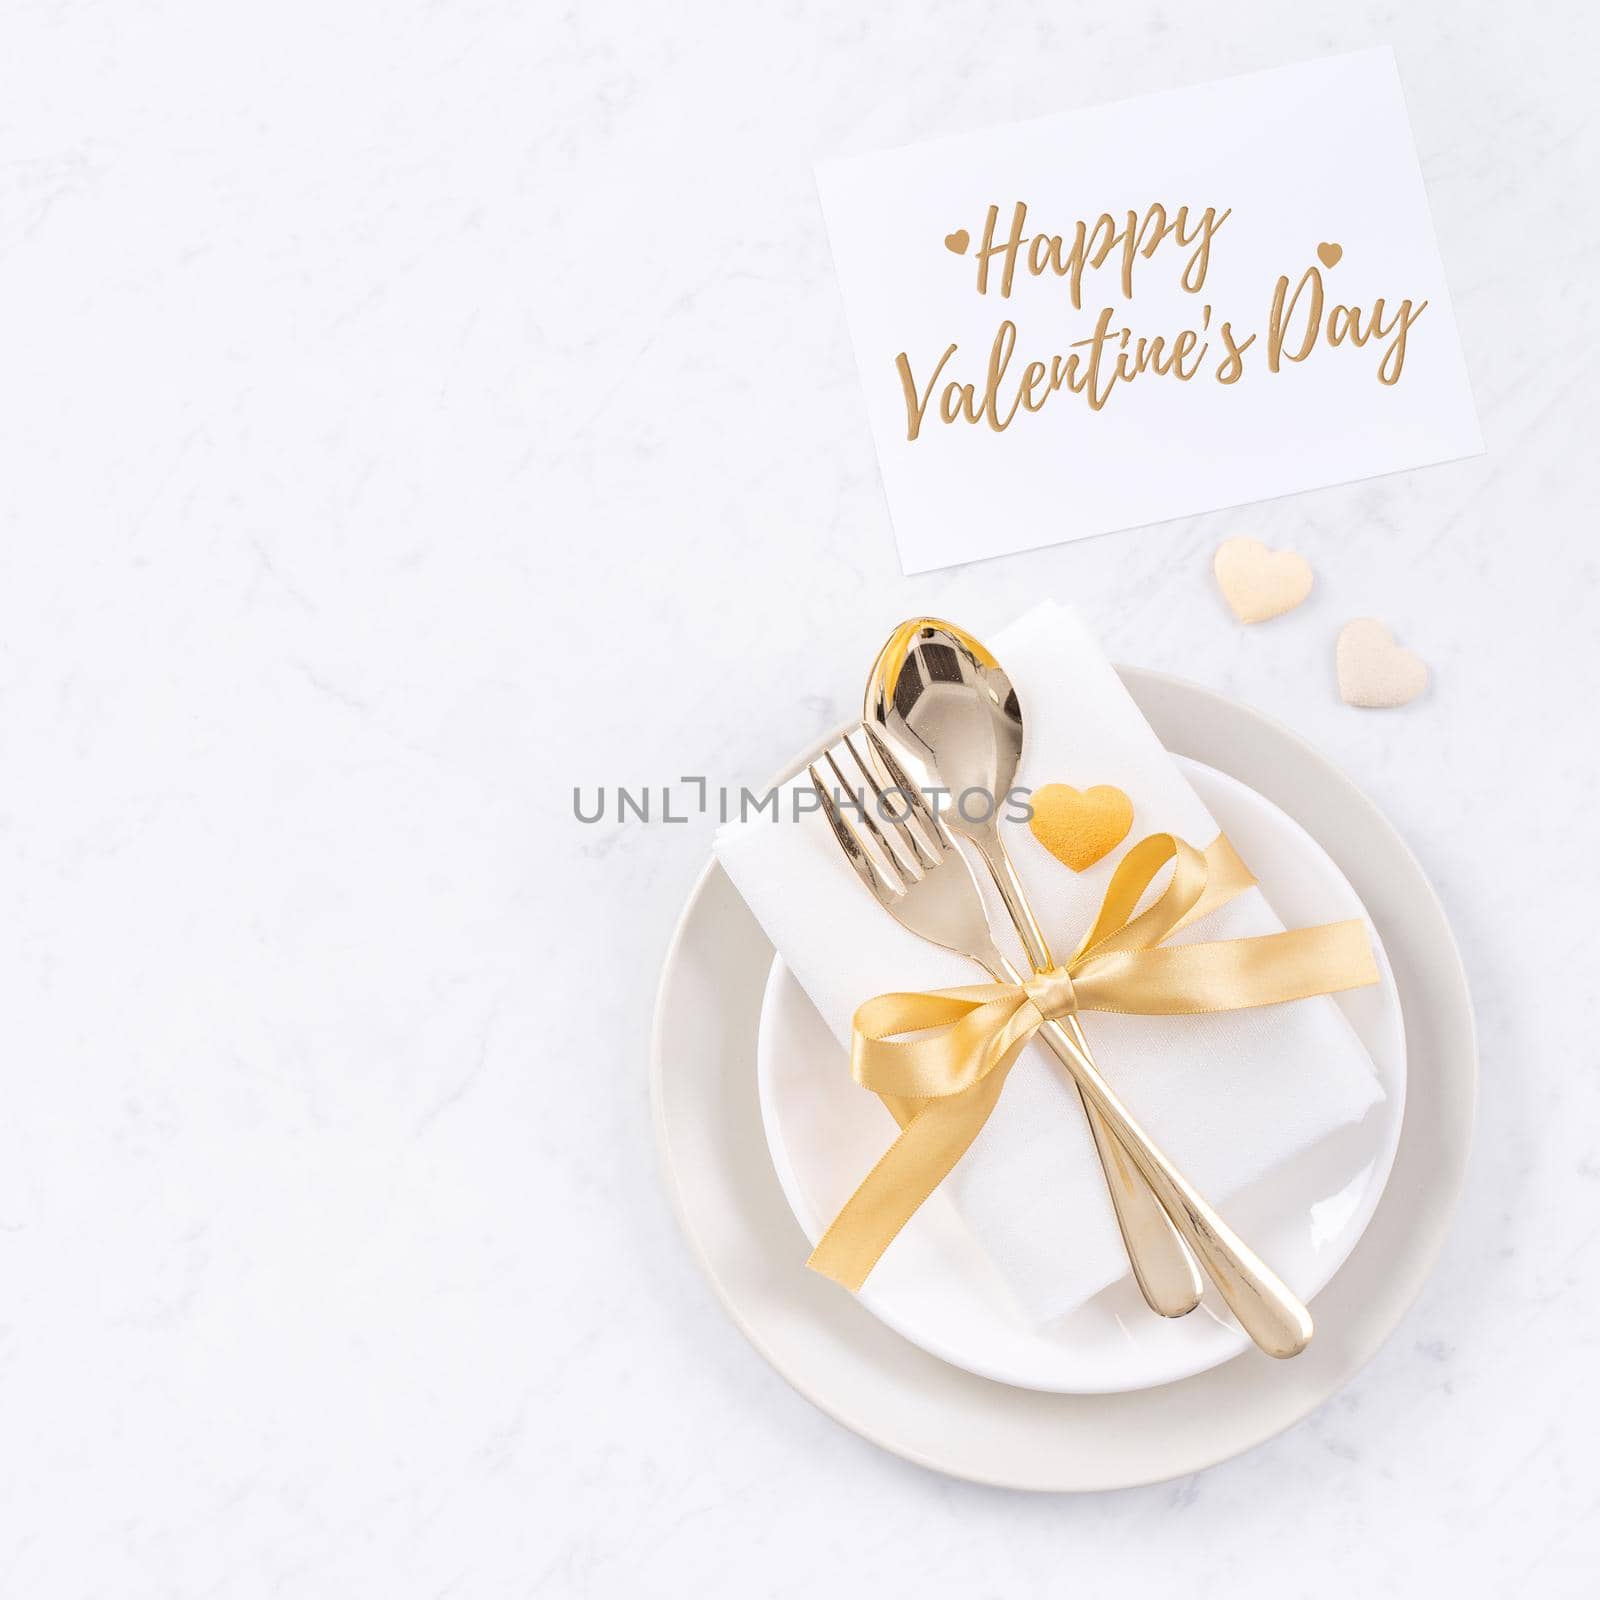 Valentine's Day holiday dating meal, banquet greeting card design concept - White plate and golden color tableware on marble background, top view, flat lay. by ROMIXIMAGE